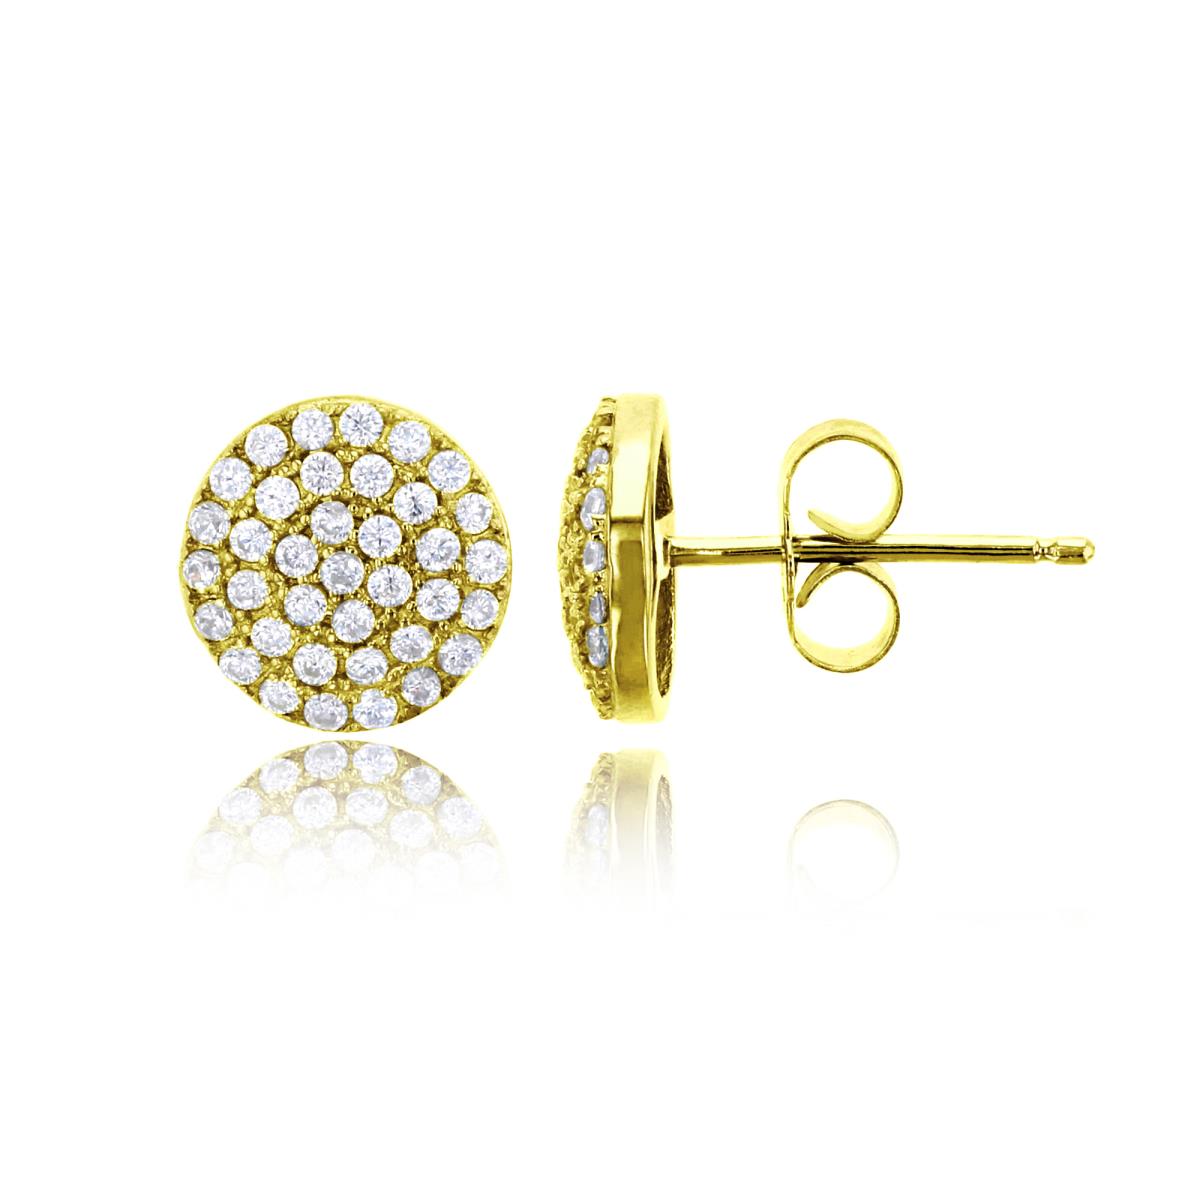 Sterling Silver Yellow Micropave 9x9mm Circle CZ Stud Earring